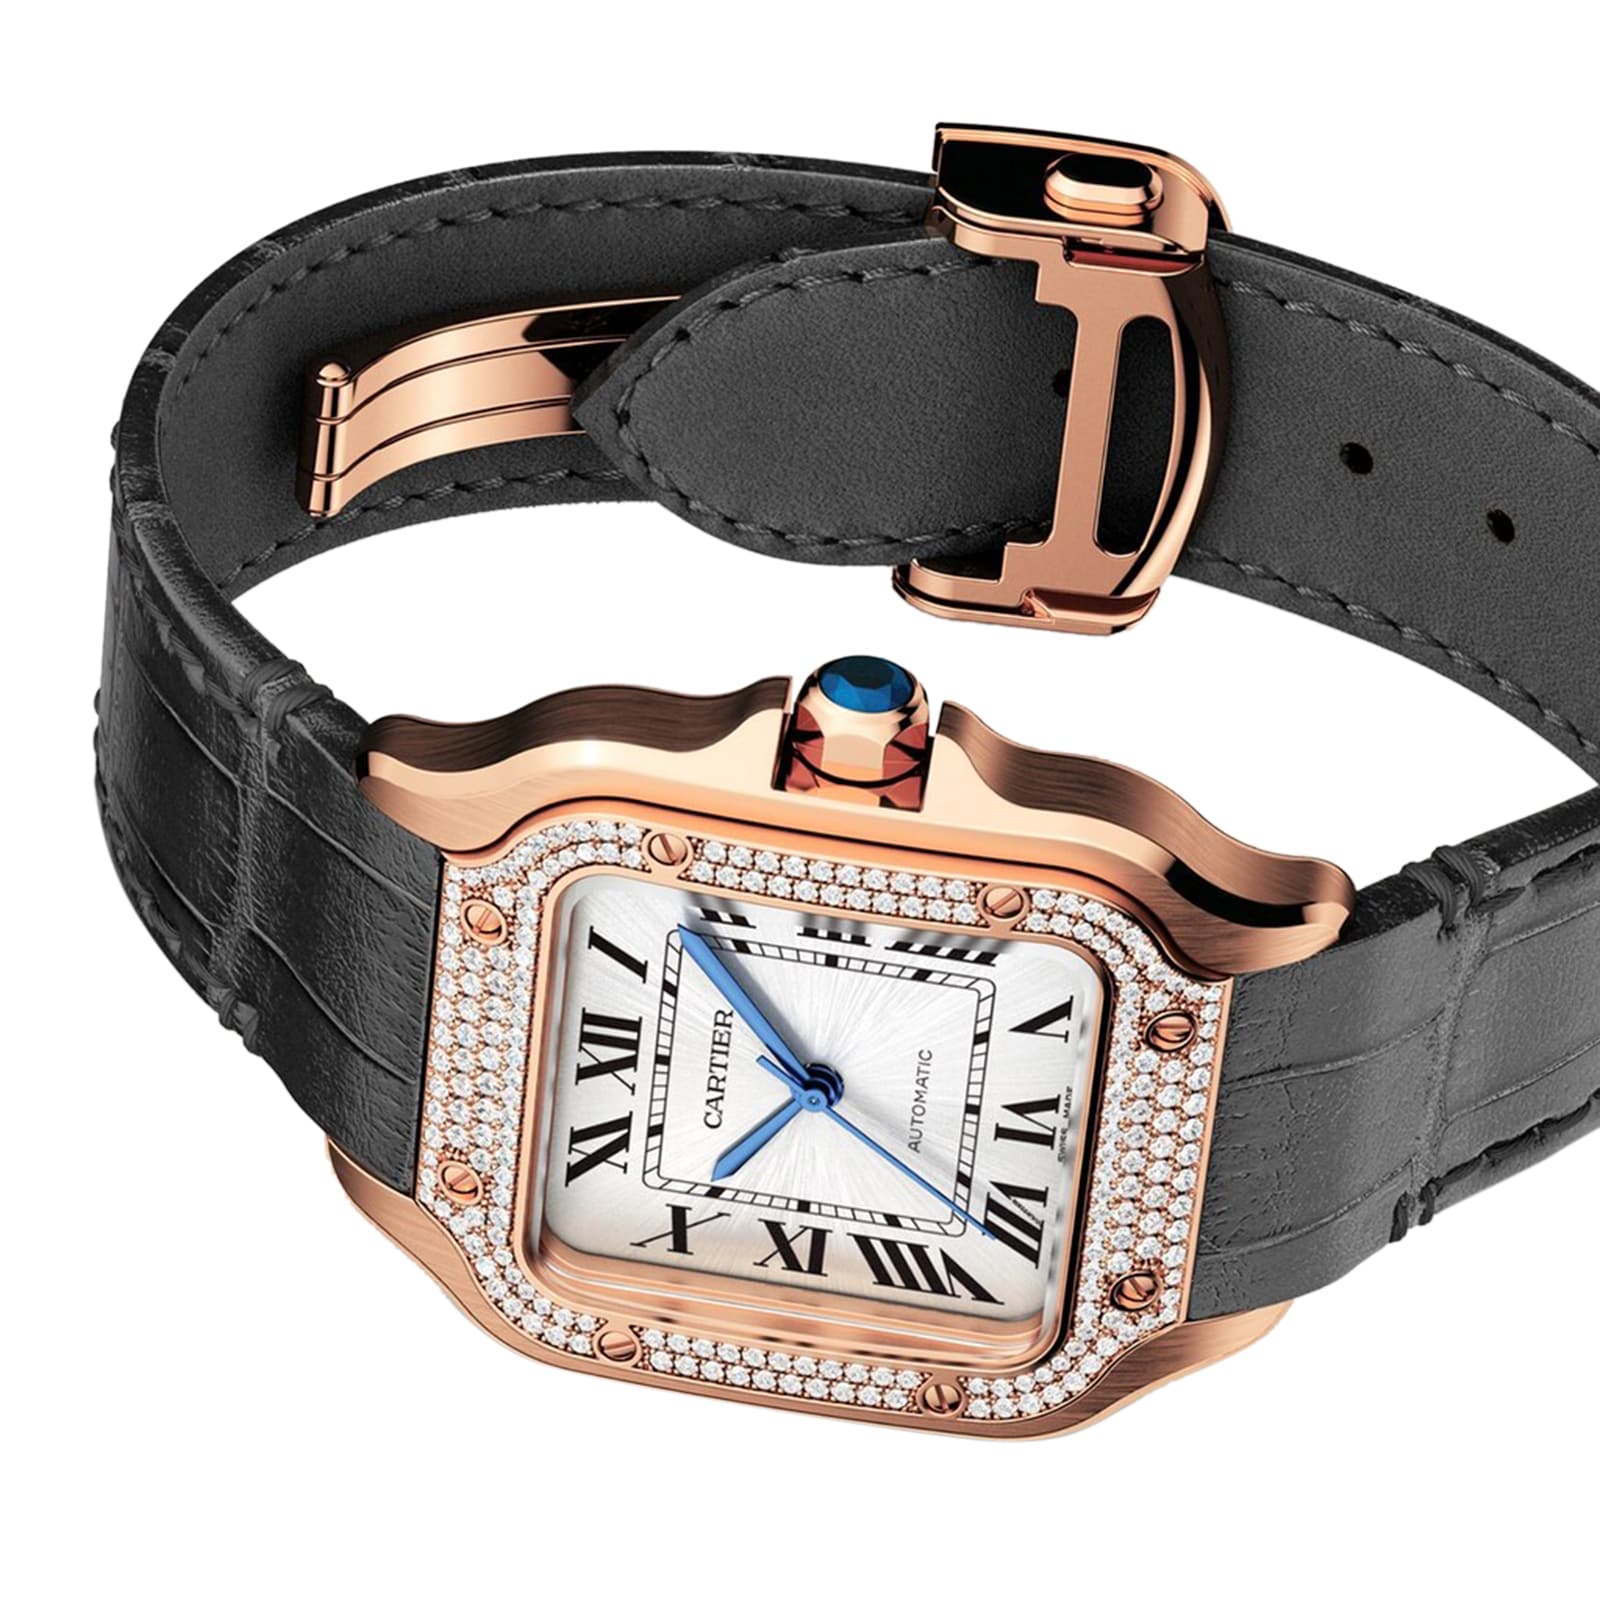 Pre-Owned Cartier Santos Watches | SwissWatchExpo